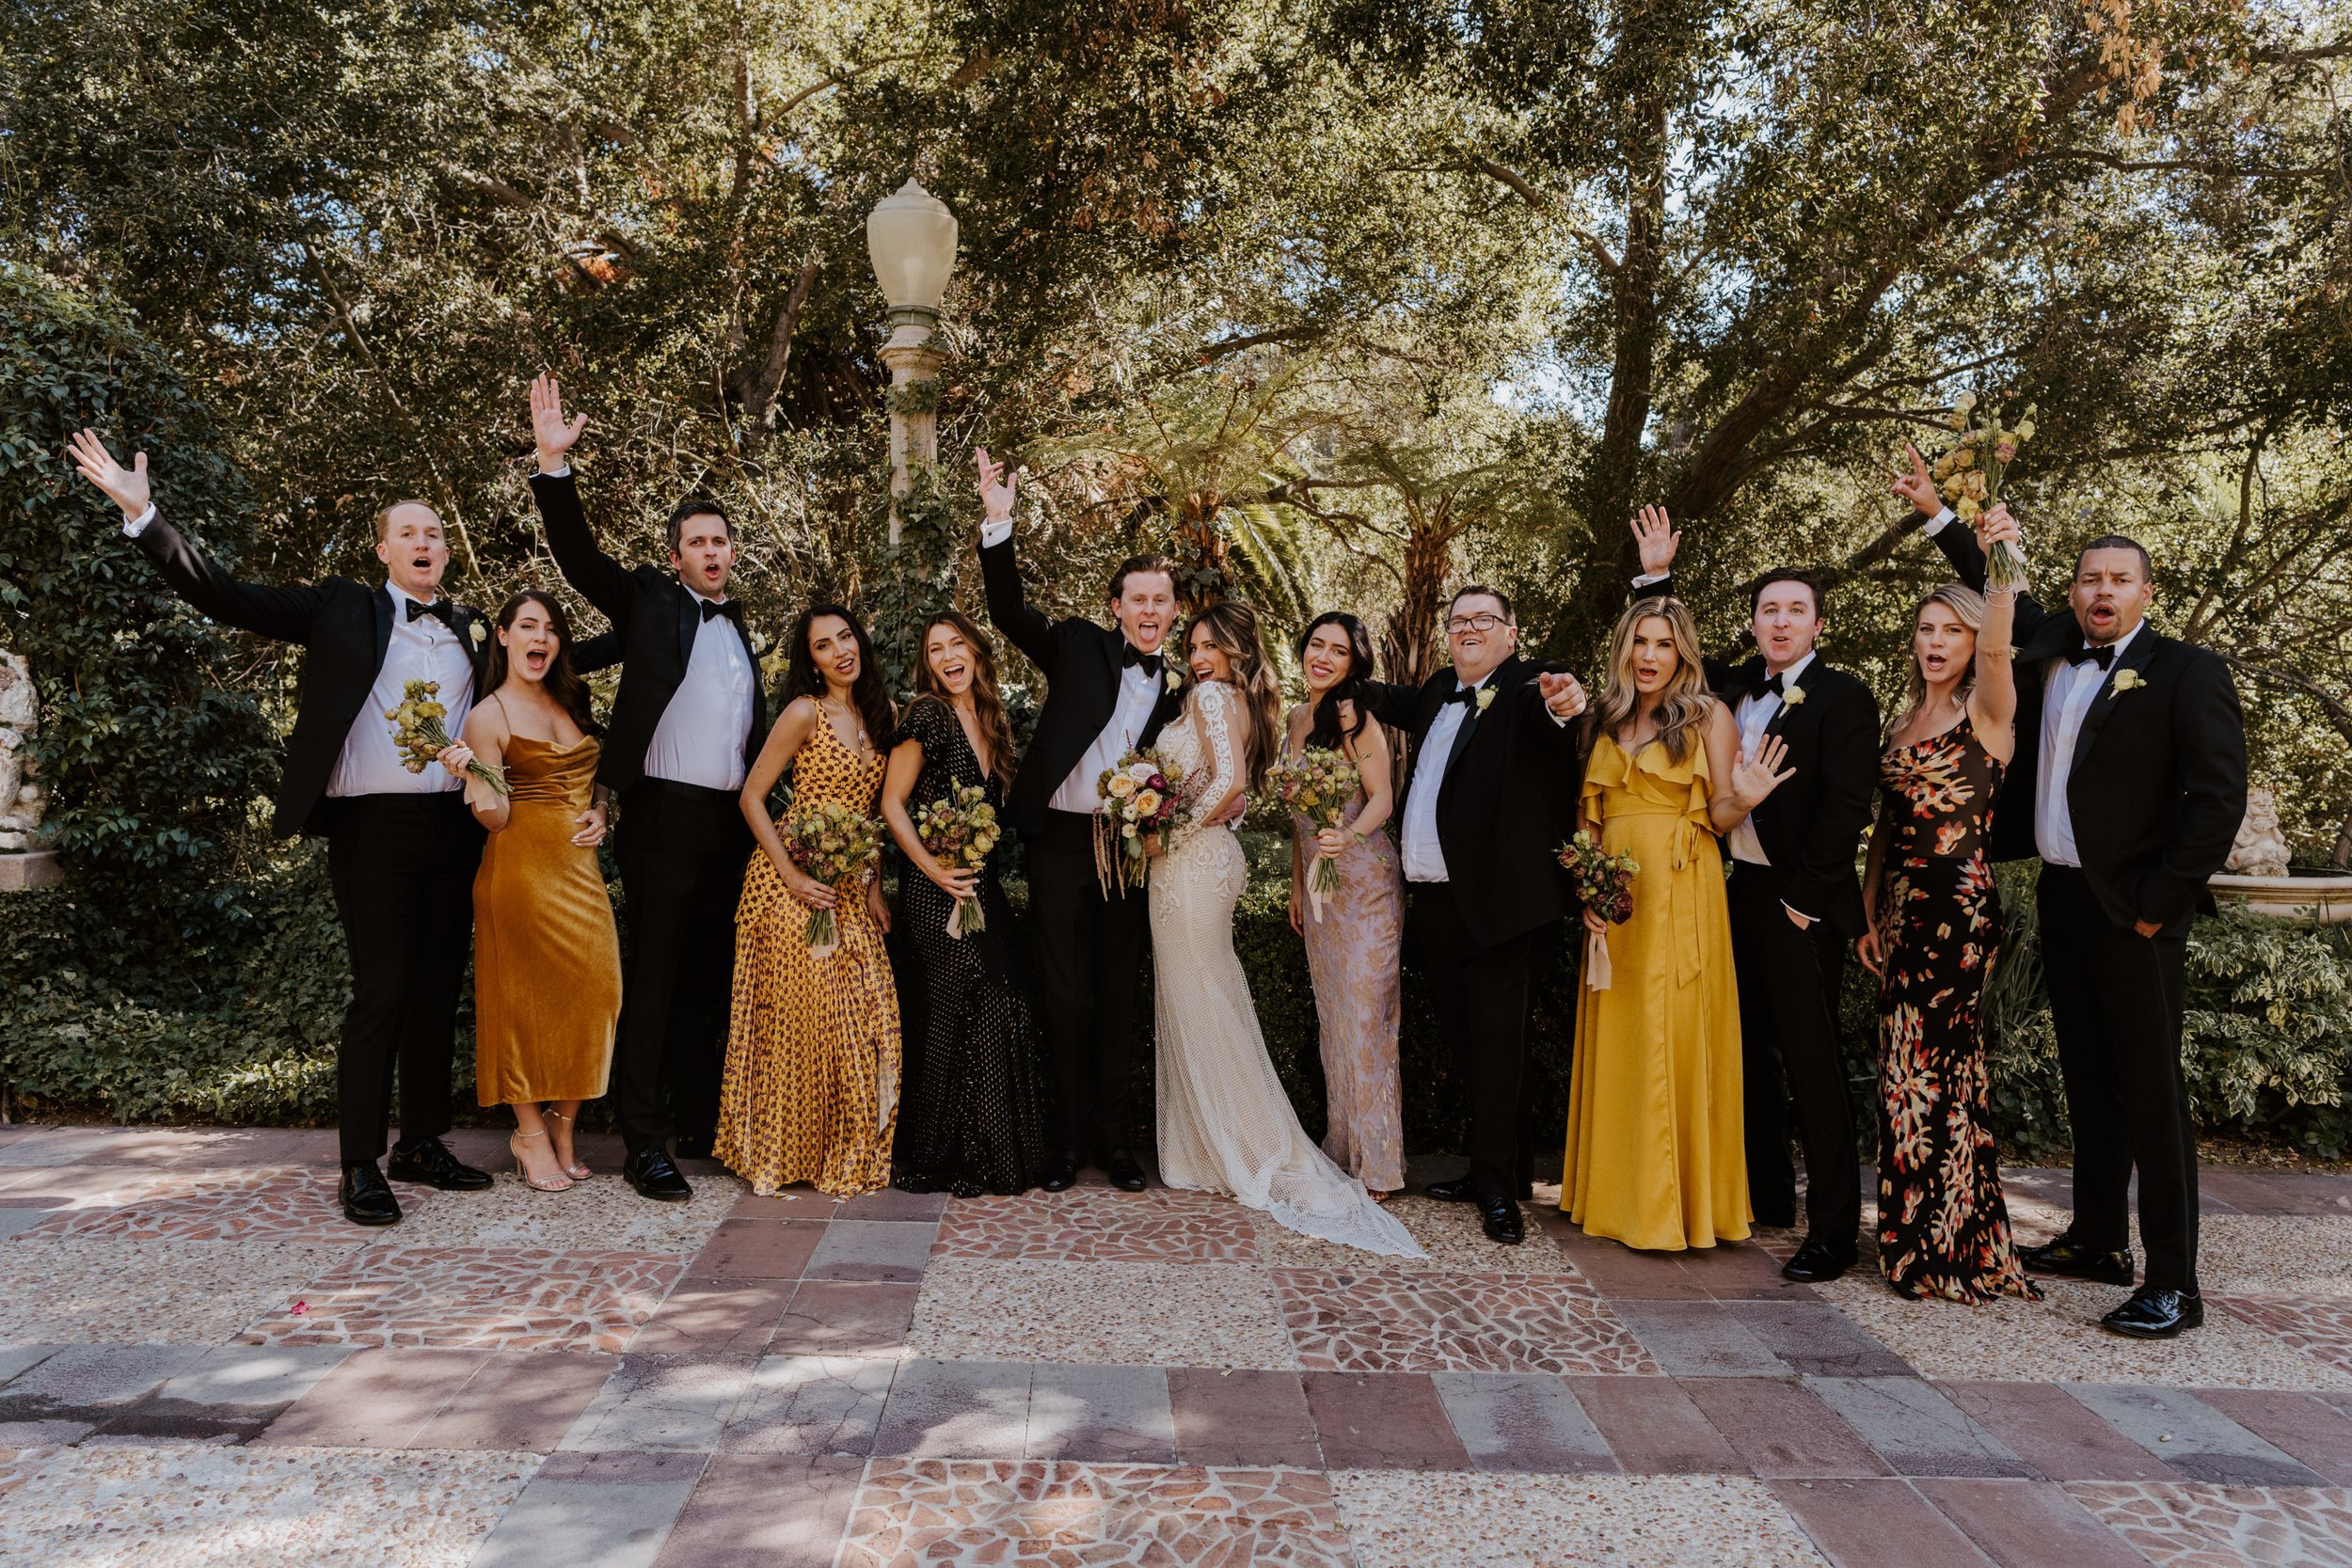 Fun wedding party photos at The Houdini Estate Wedding in Los Angeles, vibrant and candid wedding photographer Tida Svy